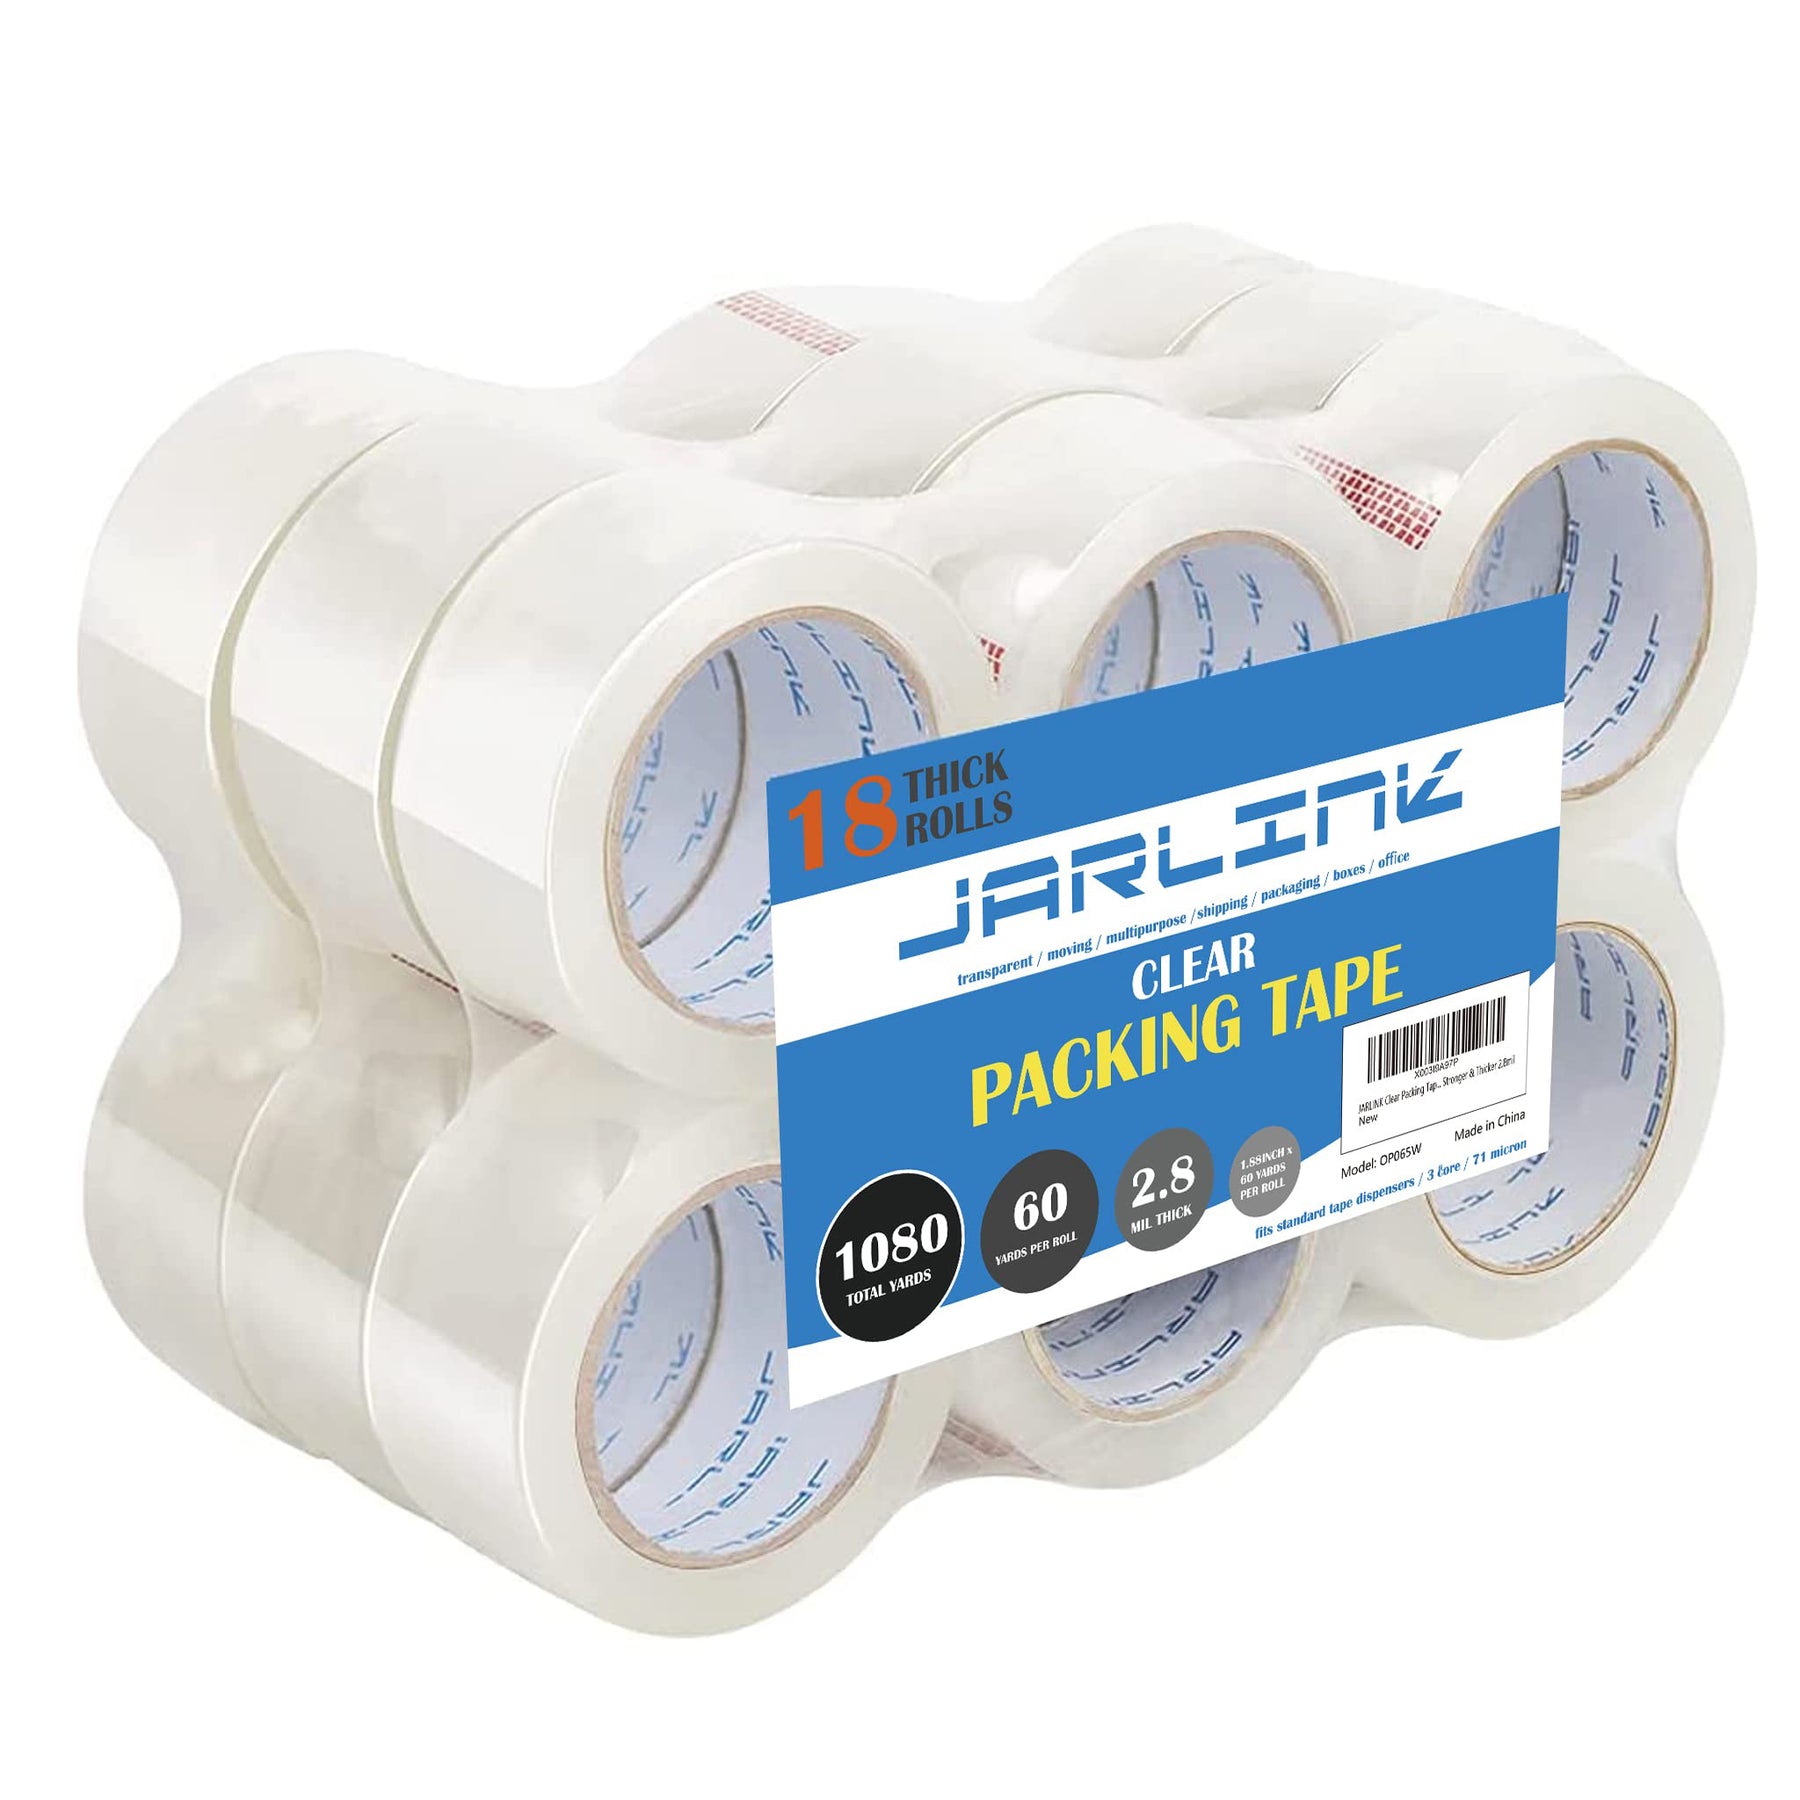 JARLINK Clear Packing Tape (12 Rolls), Heavy Duty Packaging Tape for Shipping Packaging Moving Sealing, Stronger & Thicker 2.8mil, 1.88 inches Wide, 60 Yards Per Roll, 720 Total Yards